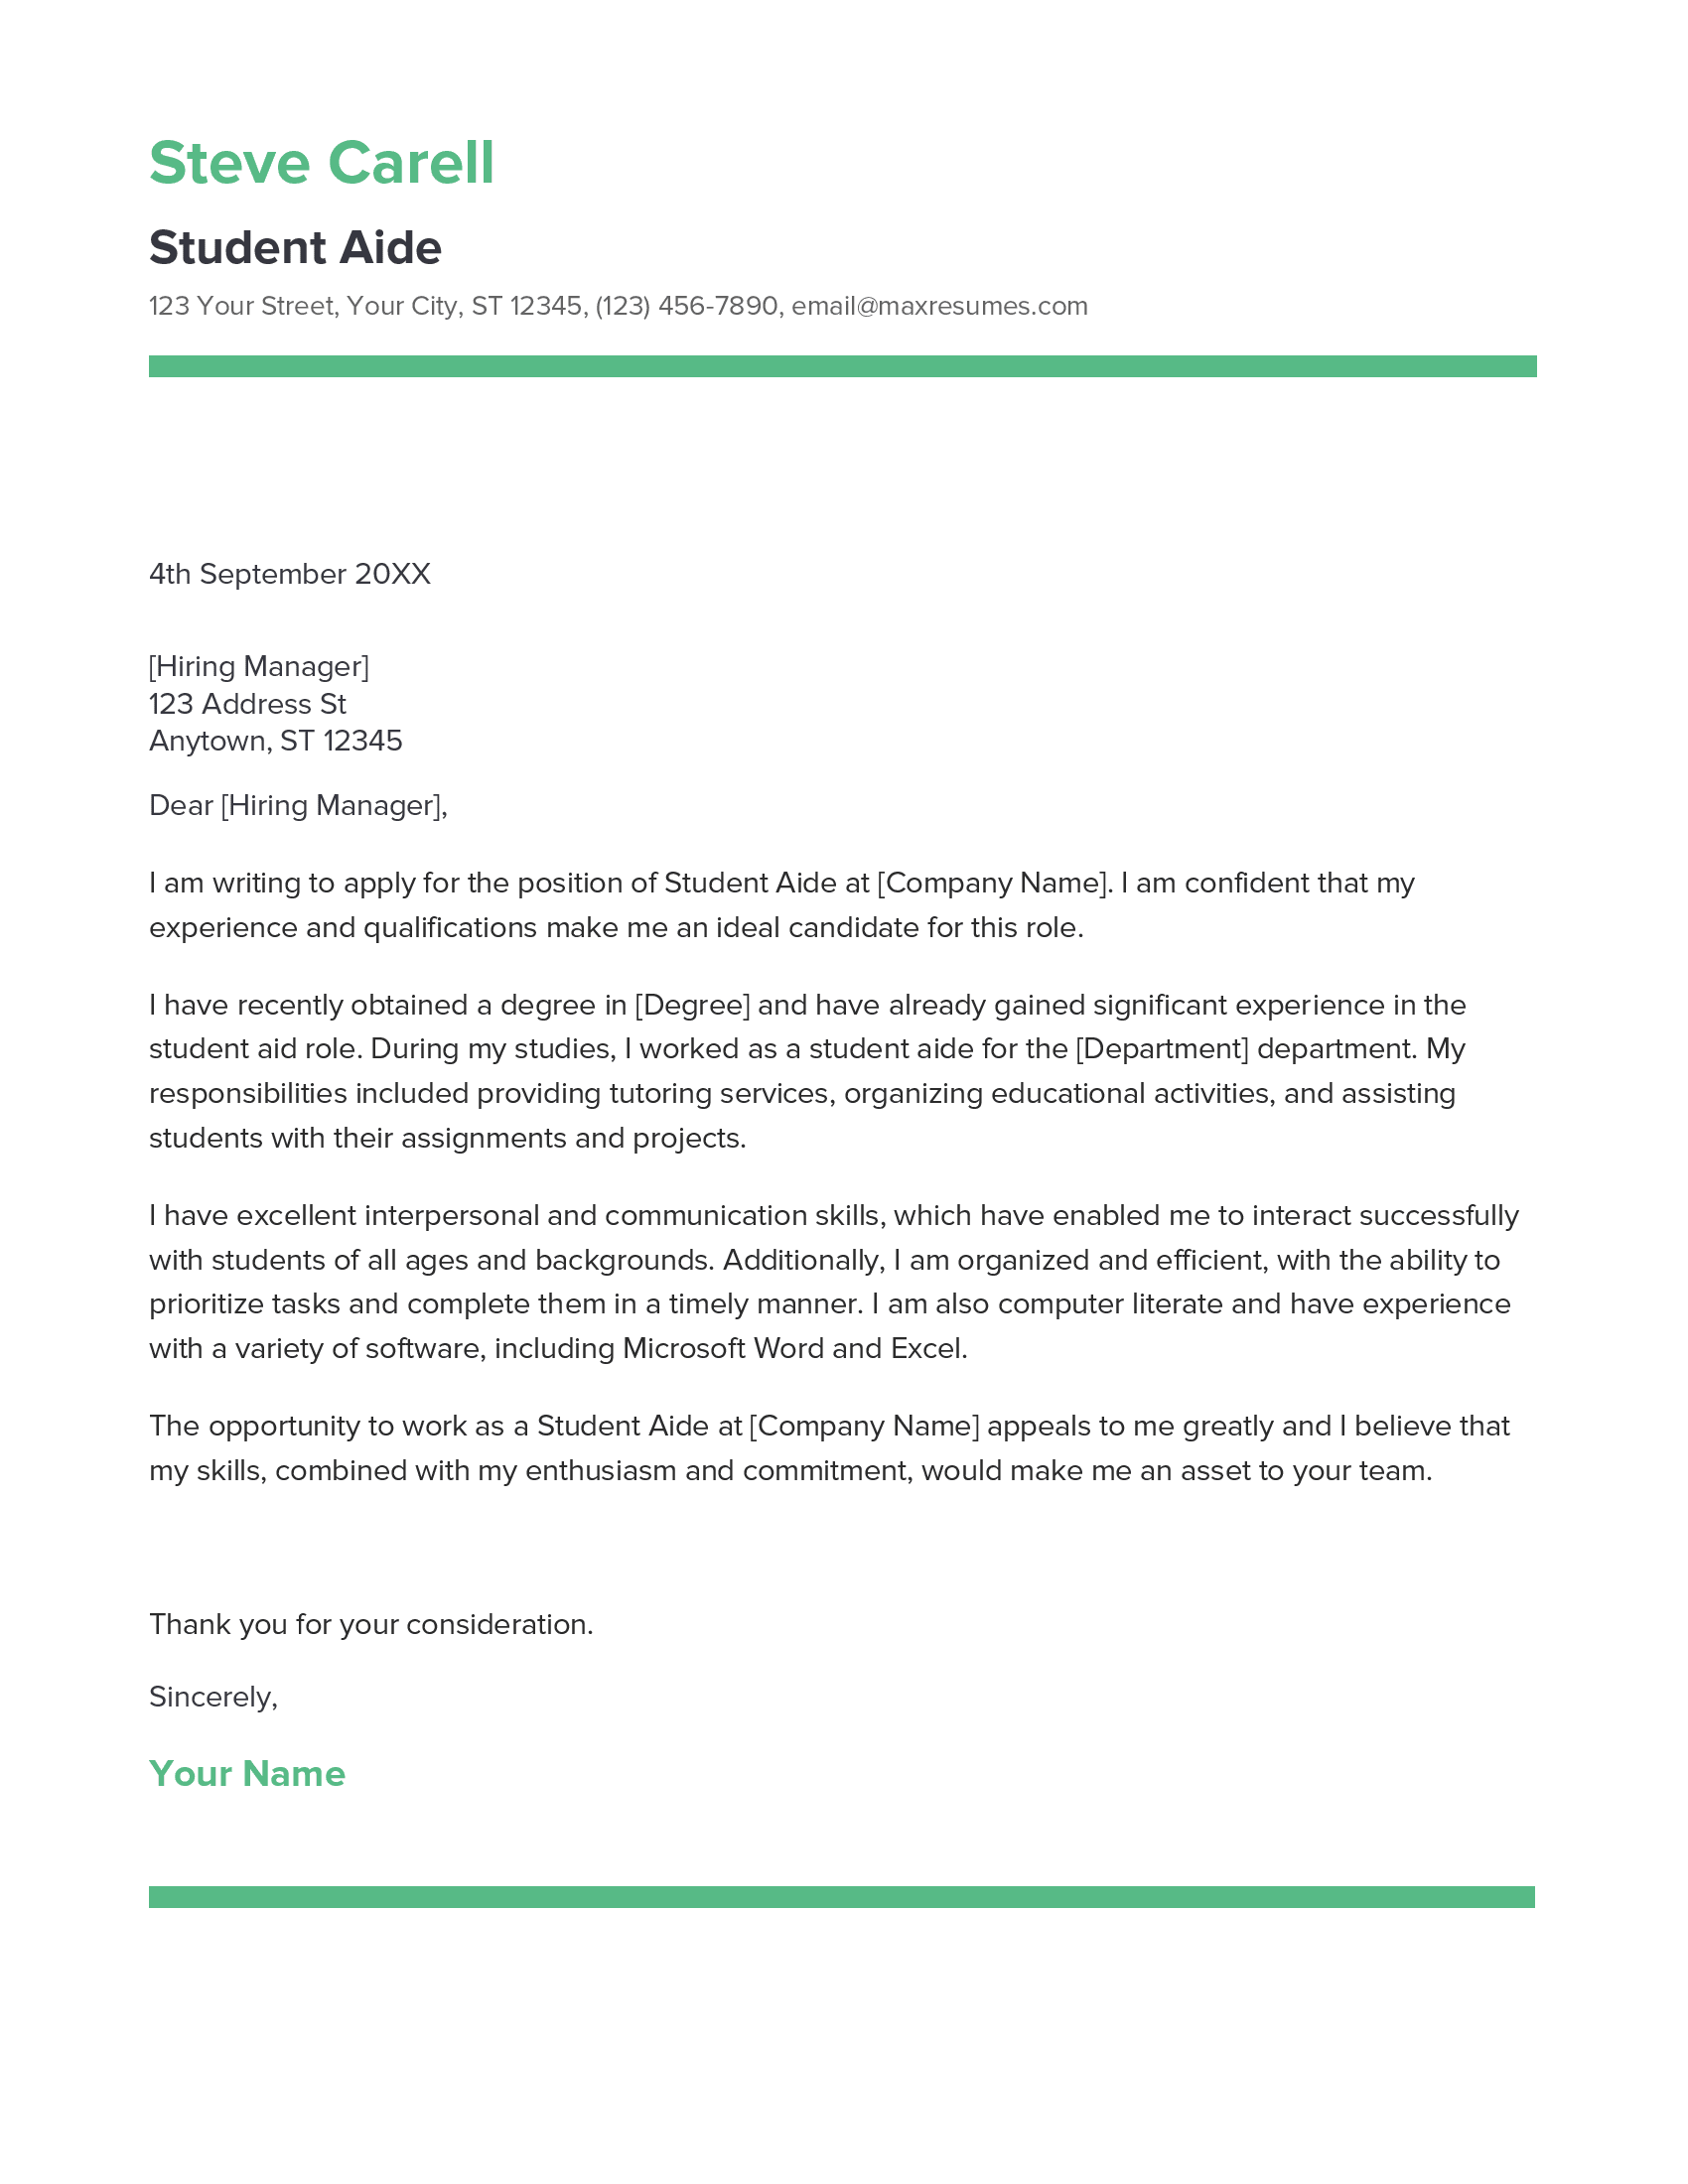 Student Aide Cover Letter Example